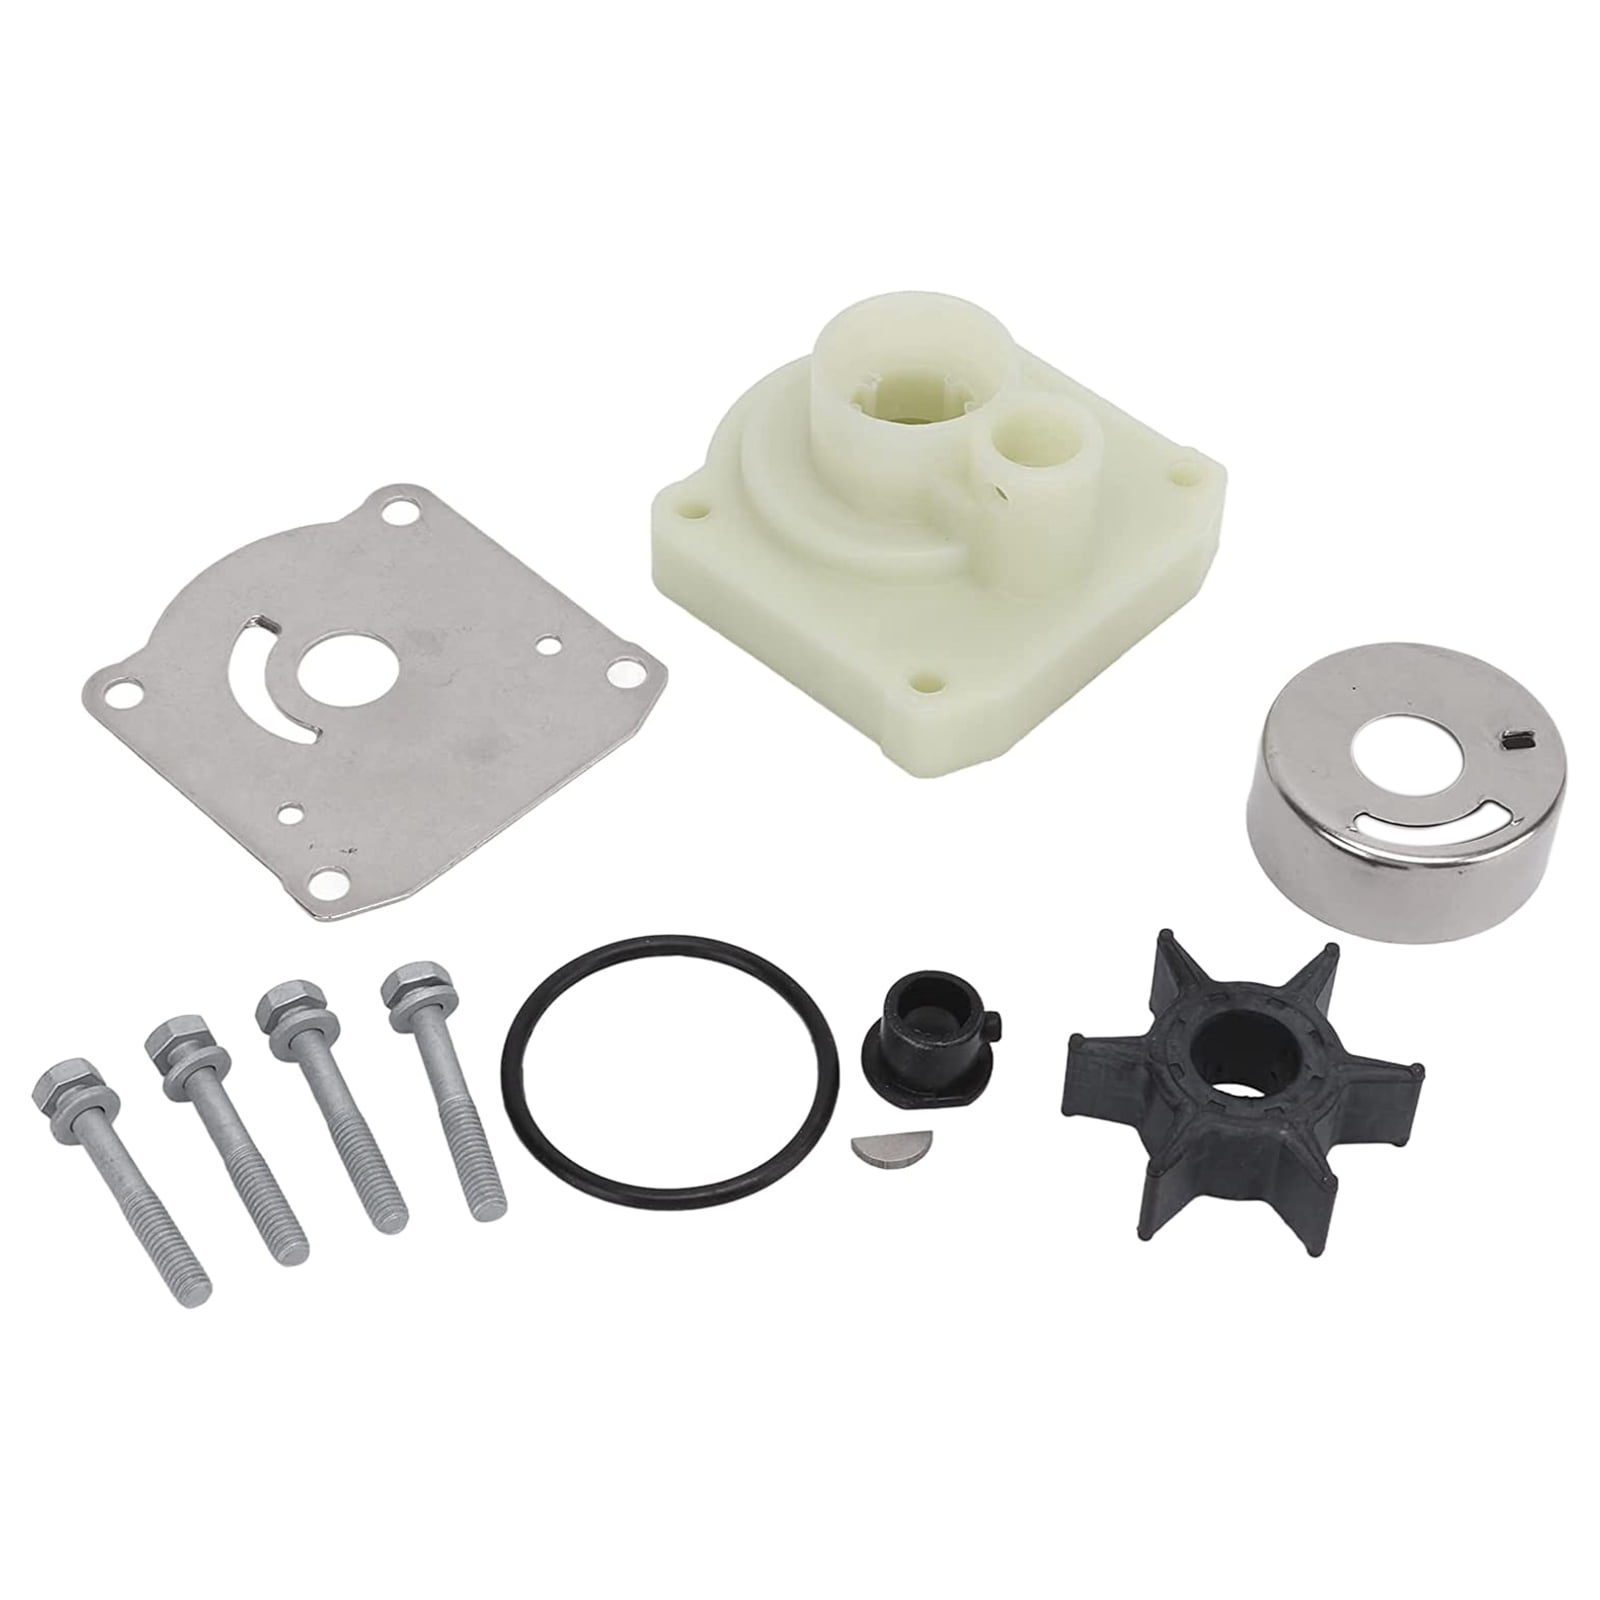 682-W0078-A1 Water Pump Impeller Repair Kit for Yamaha Outboard 682-W0078-00/682-W0078-01 Sierra 18-3148 9.9HP 15HP F9.9 FT9.9 